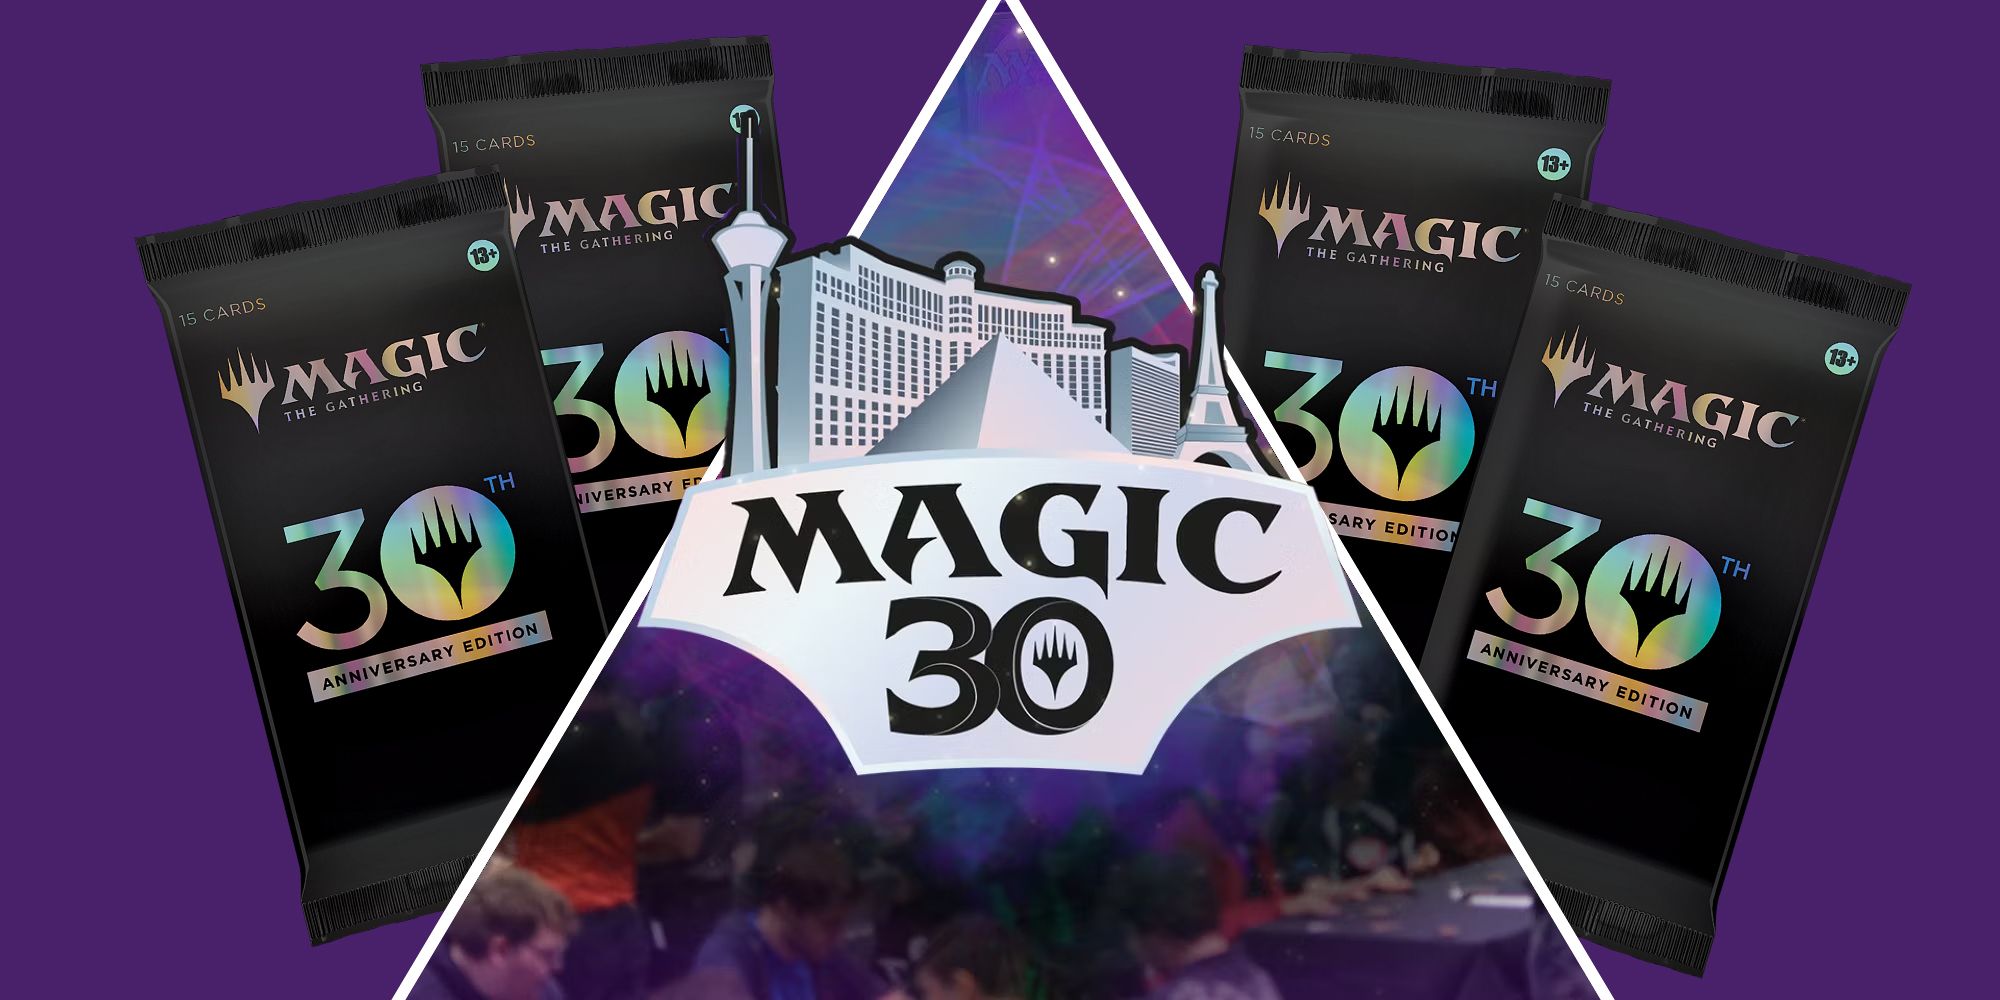 Magic 30 Attendees Find $1K 30th Anniversary Edition Booster Packs 